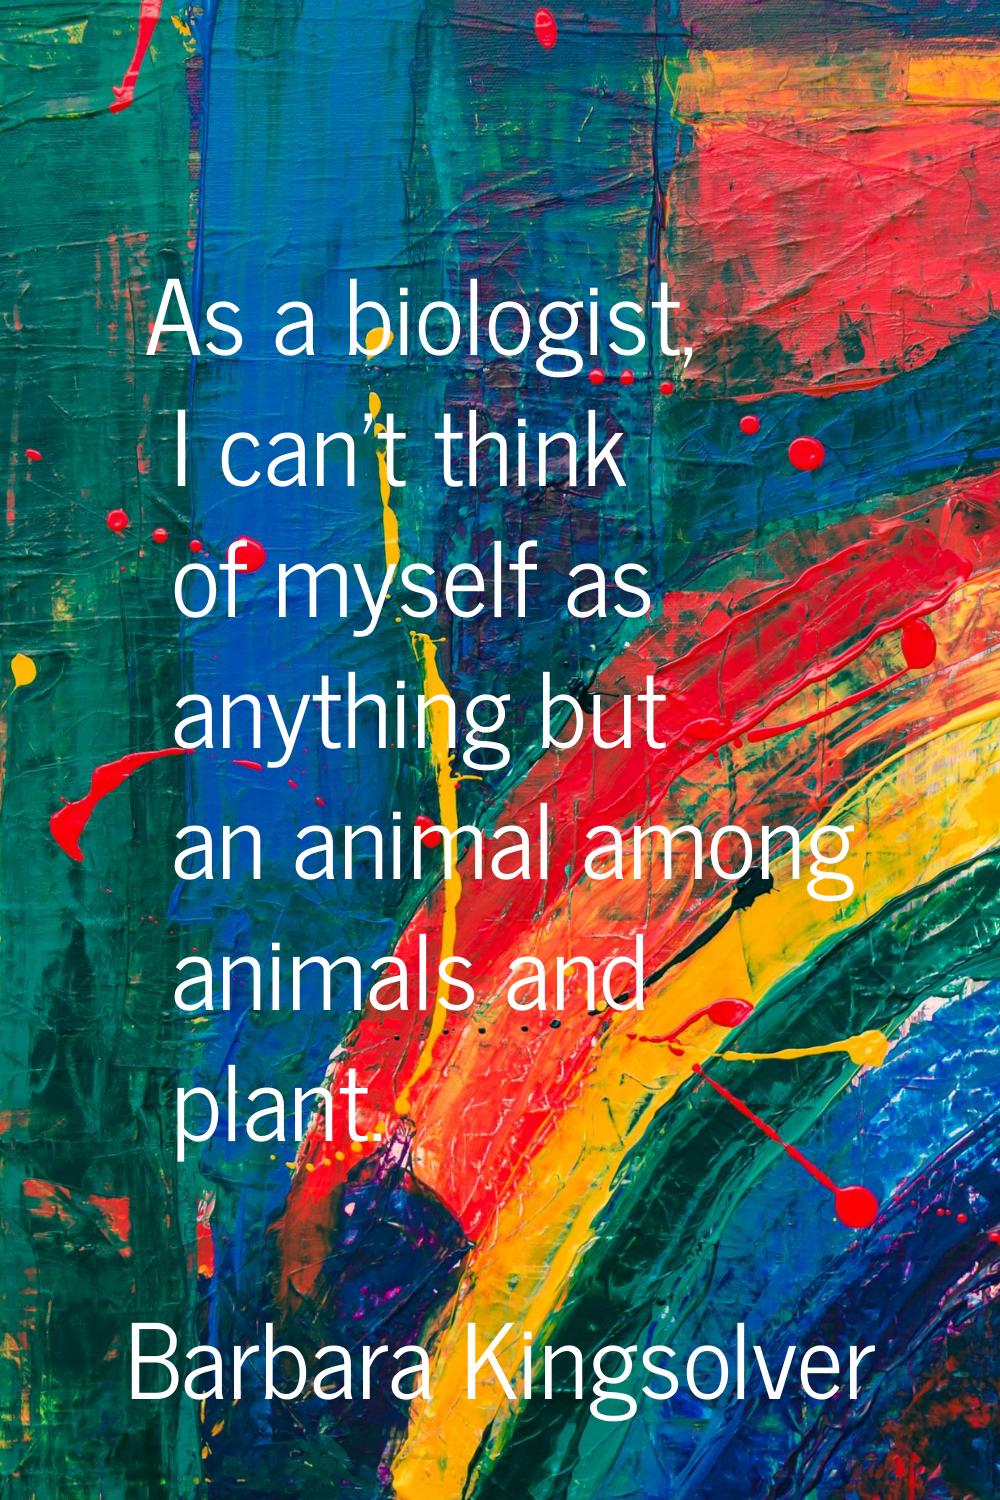 As a biologist, I can't think of myself as anything but an animal among animals and plant.